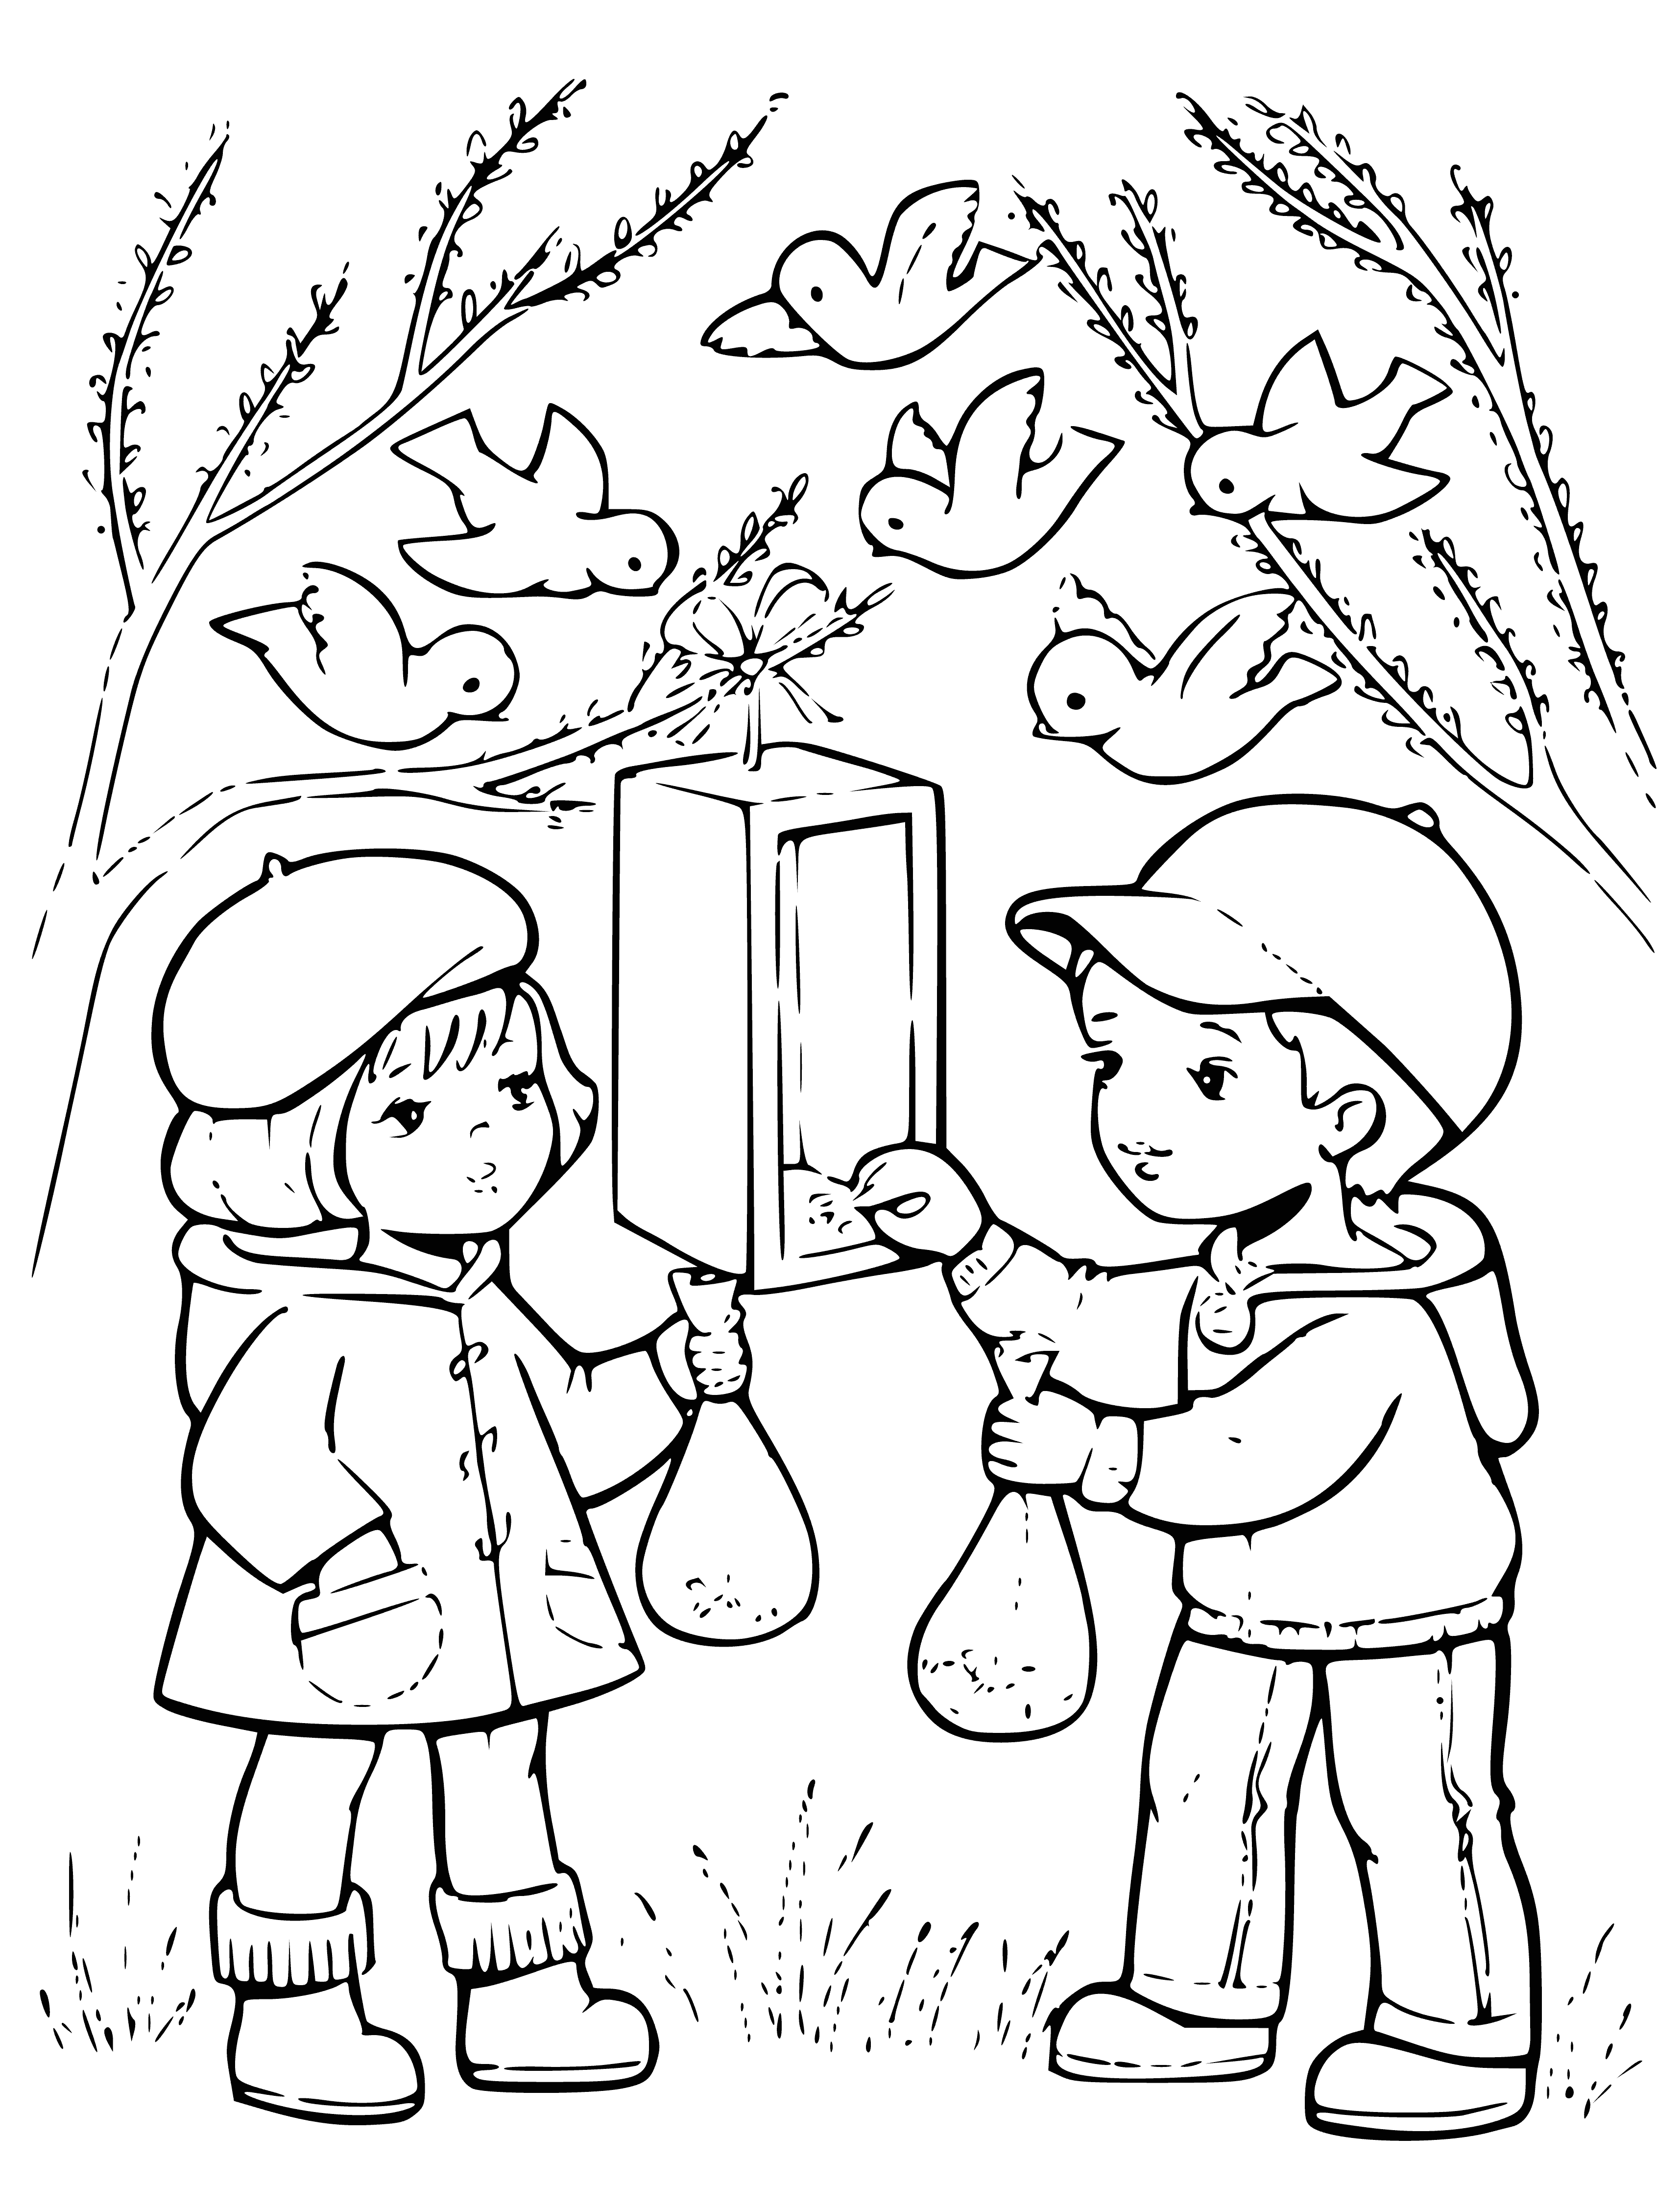 Children feed the birds coloring page